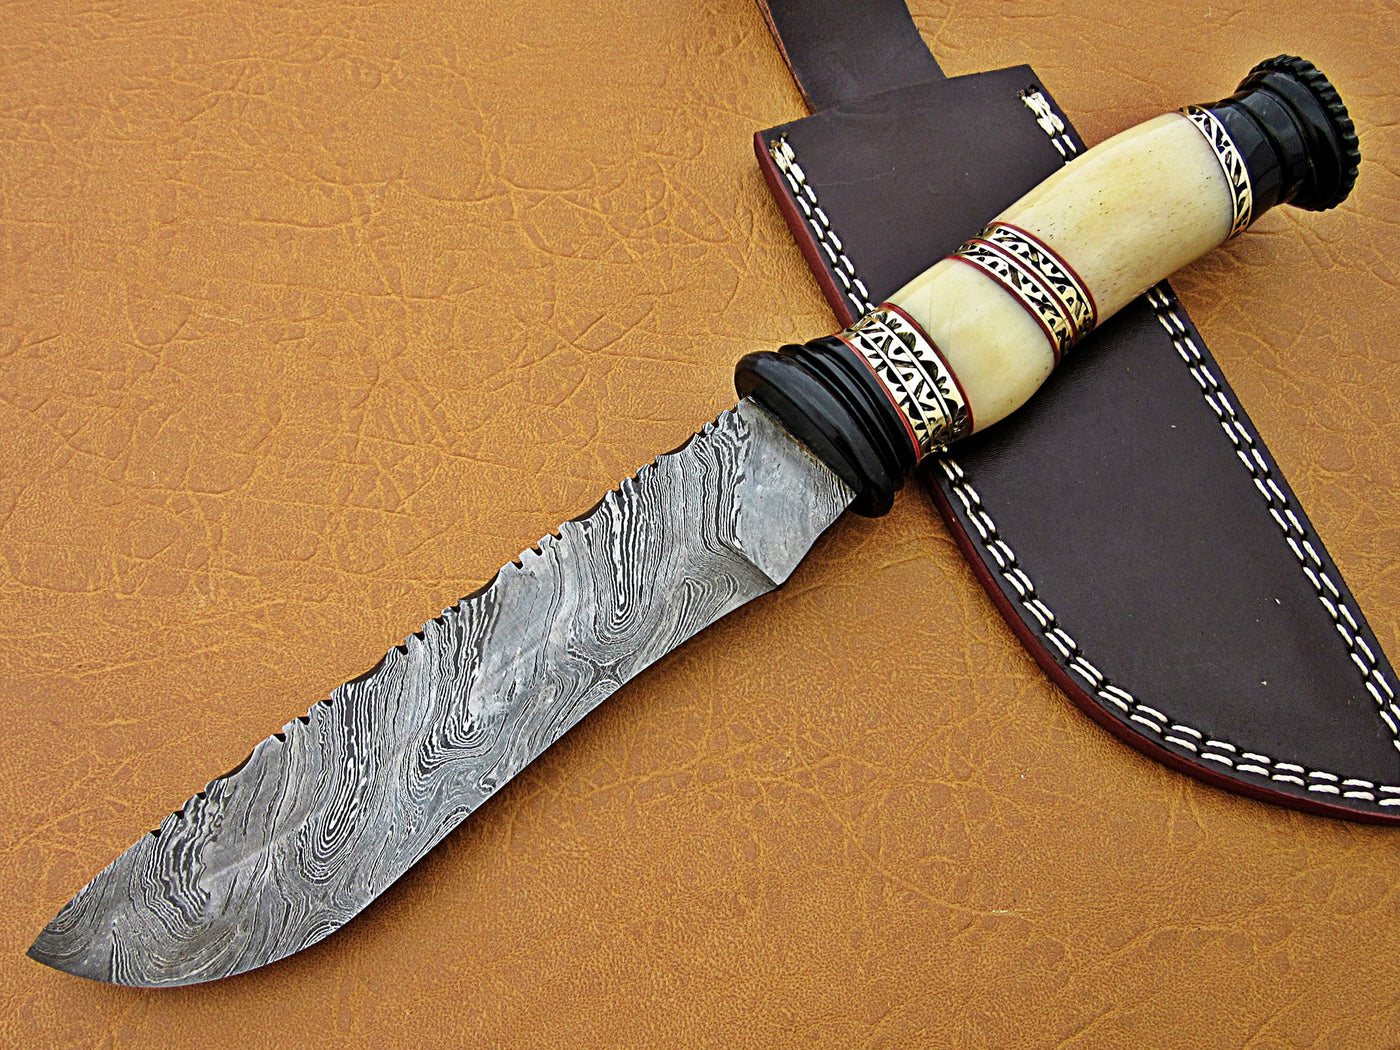 Damascus Steel Blade Bowie Handle Material Camel Bone